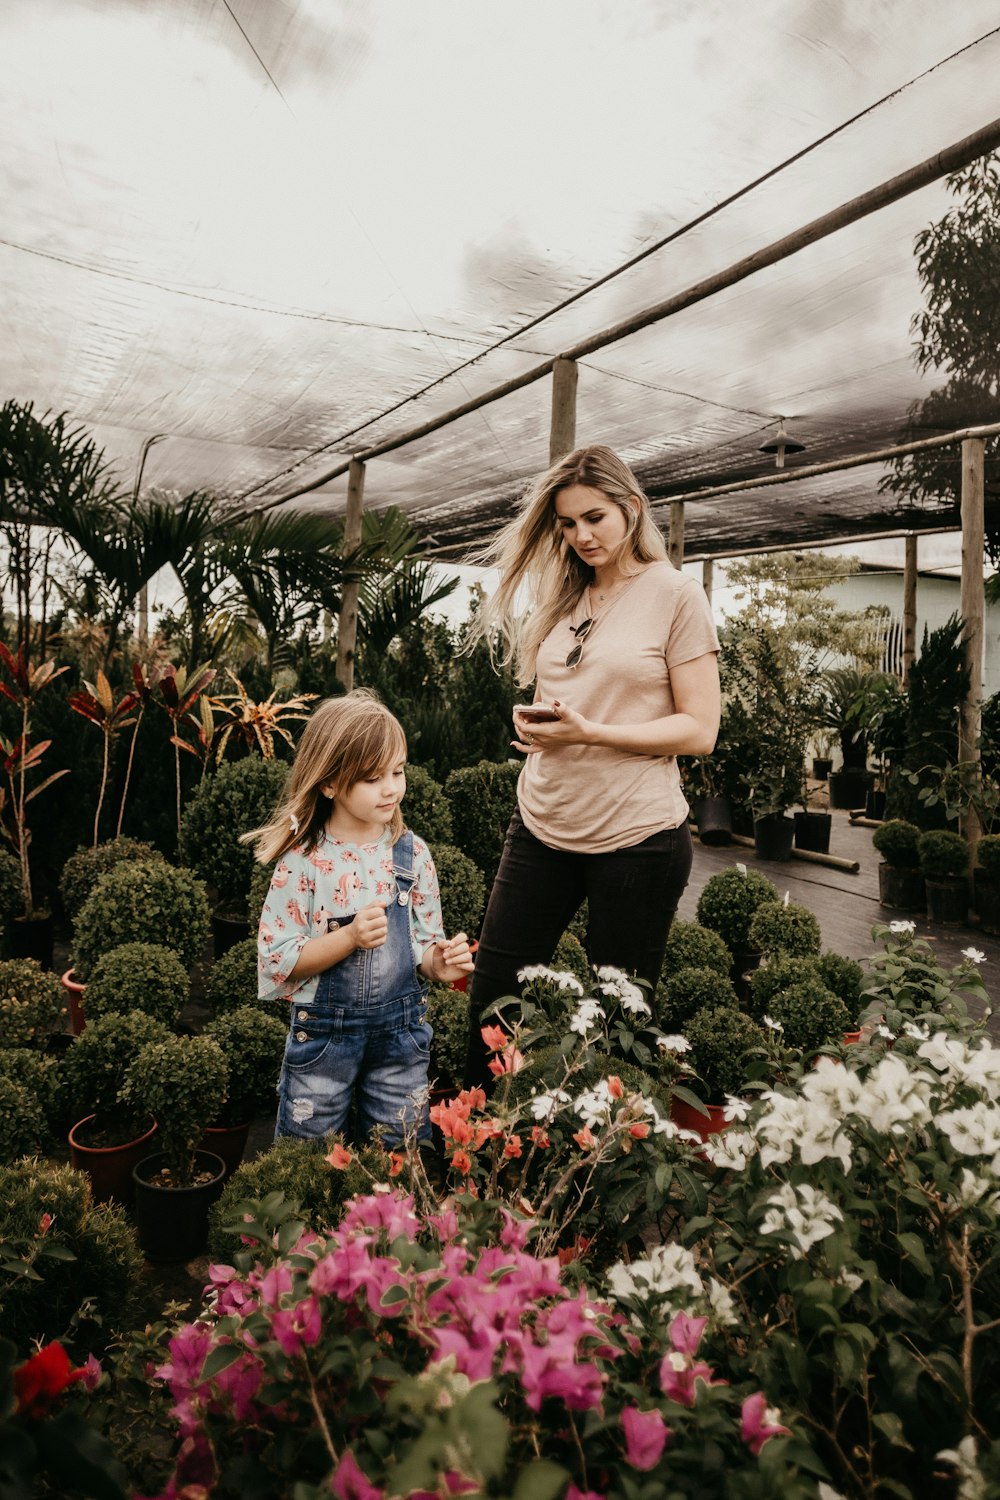 woman and girl standing near flowers